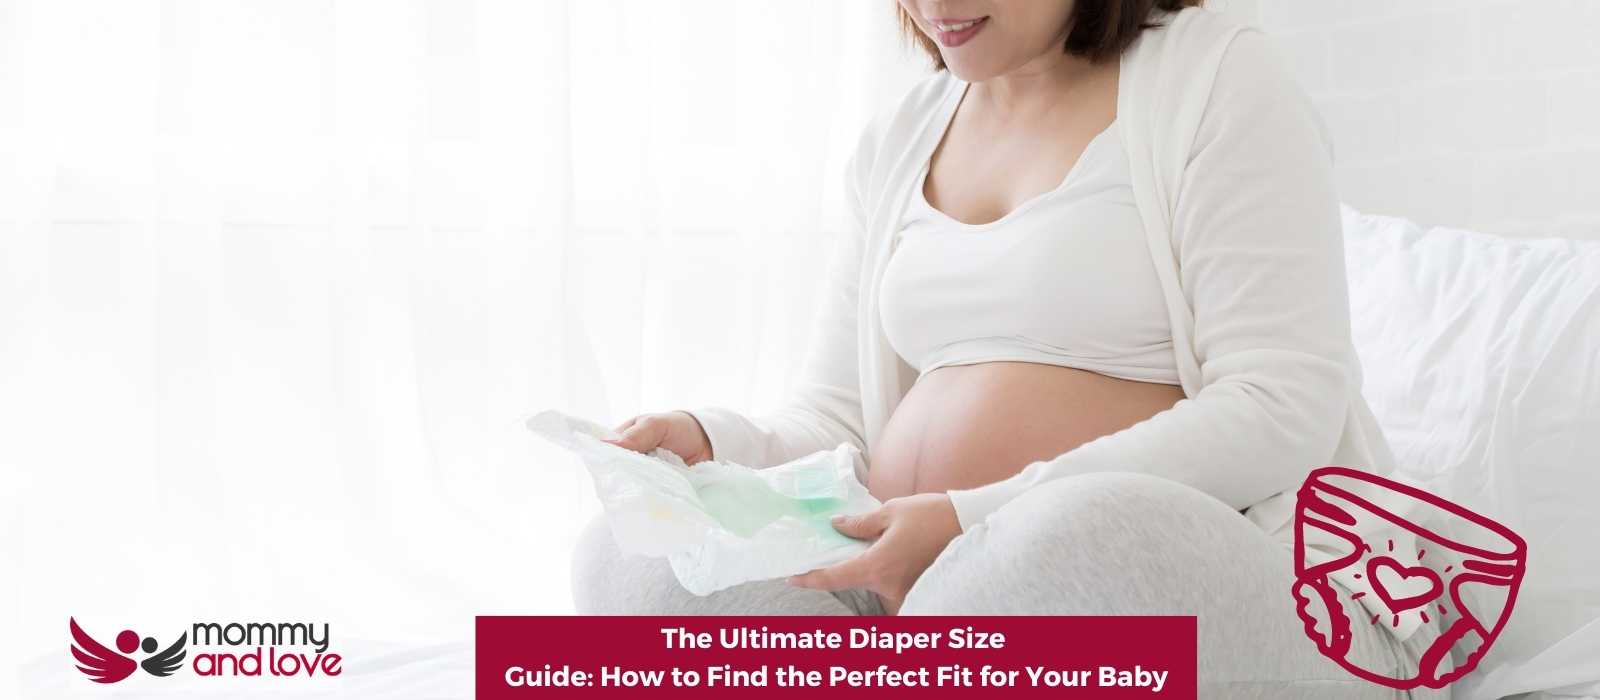 The Ultimate Diaper Size Guide How to Find the Perfect Fit for Your Baby